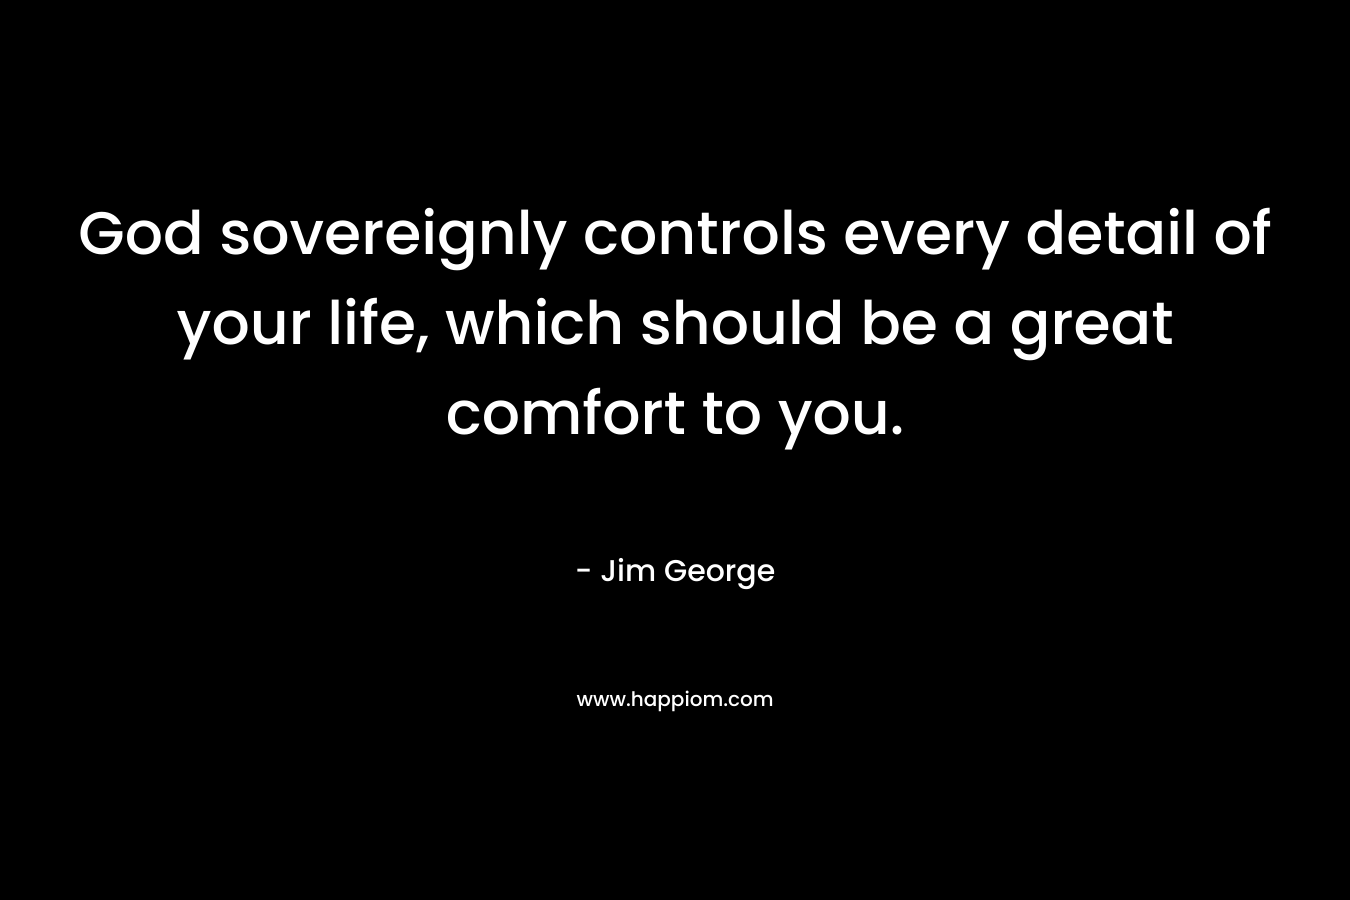 God sovereignly controls every detail of your life, which should be a great comfort to you.